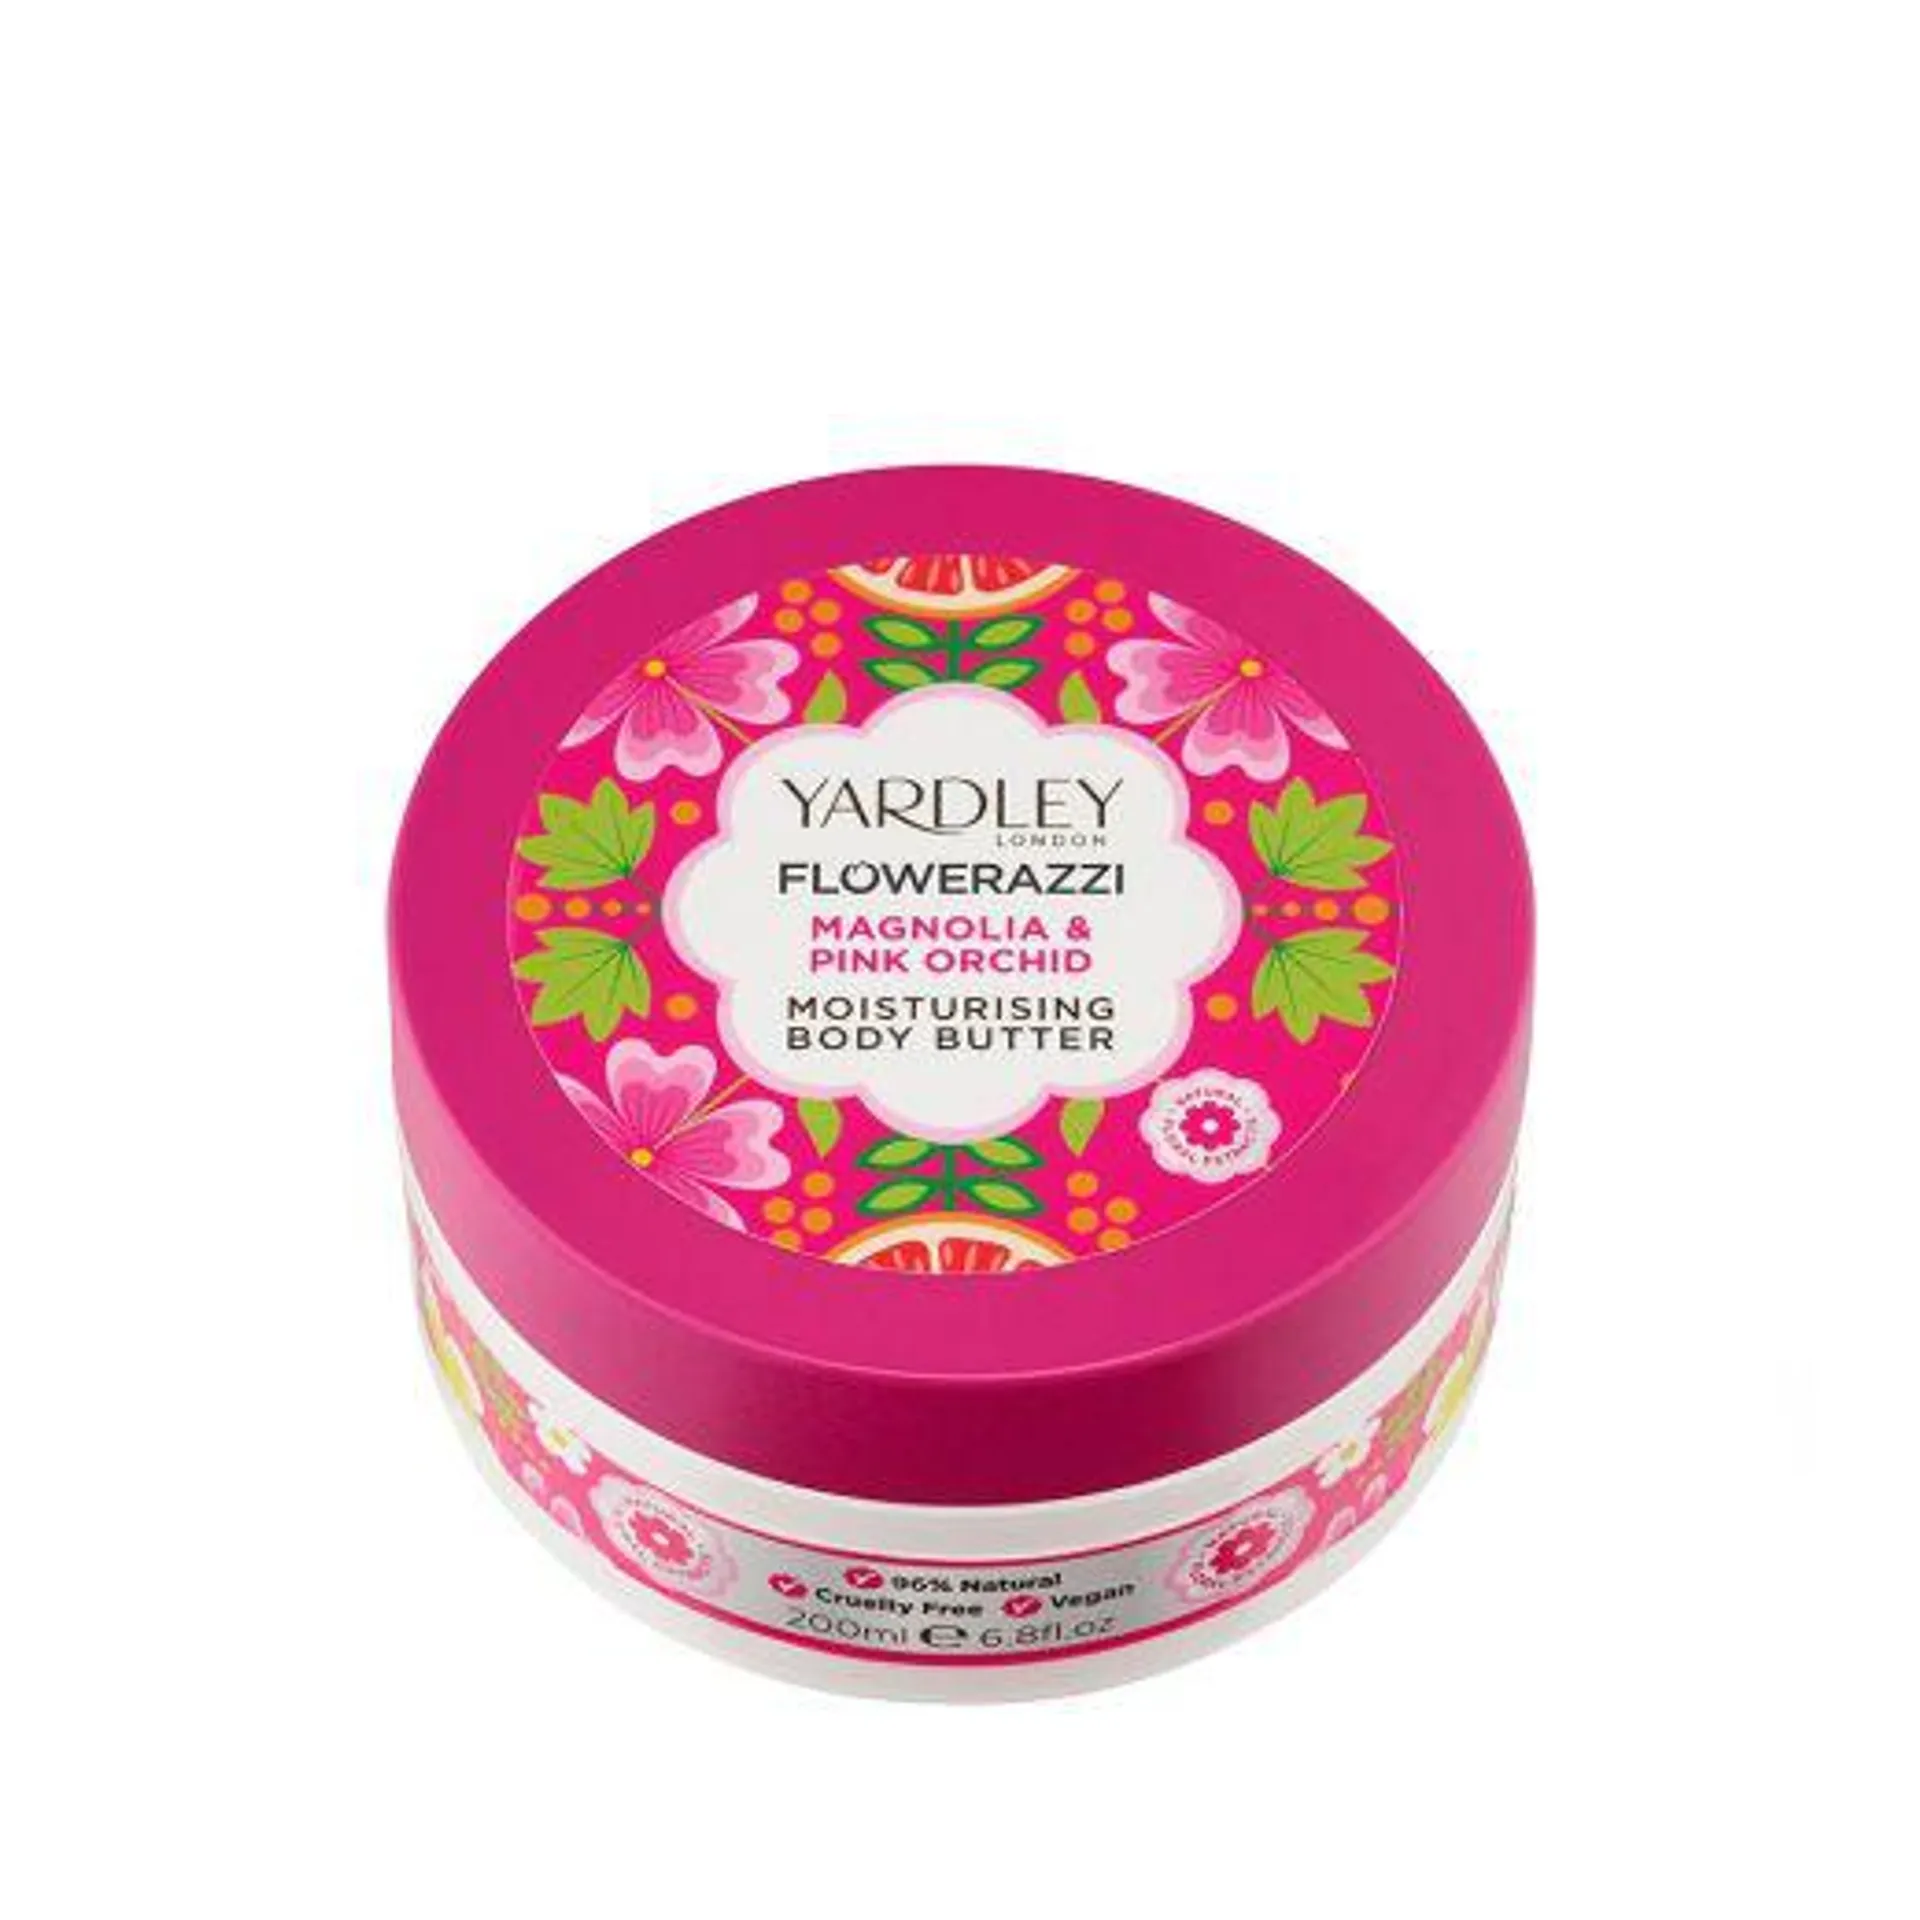 Yardley London Magnolia & Pink Orchid Body Butter 200ml